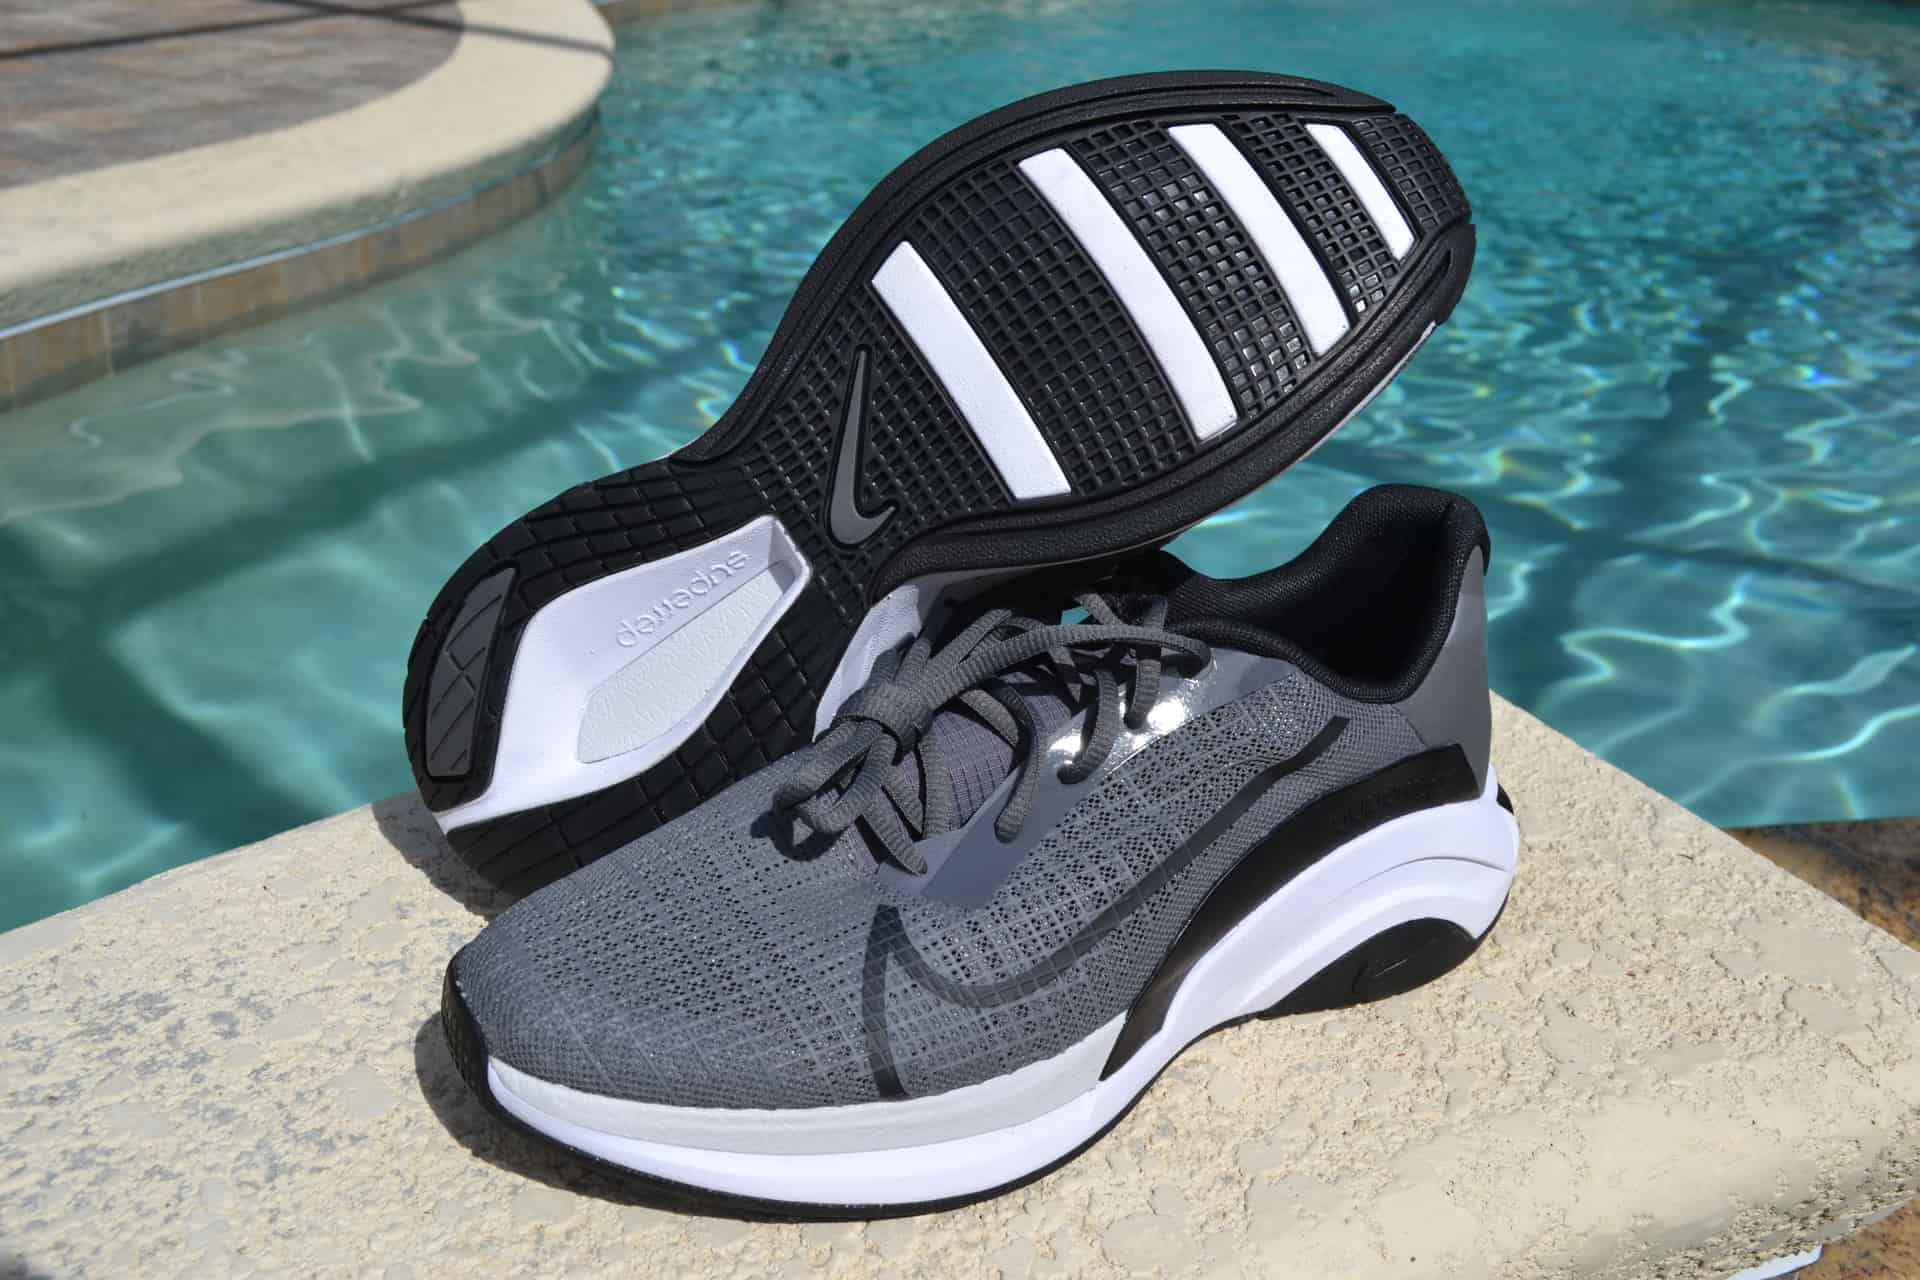 Nike ZoomX SuperRep Surge Workout Shoe Review - Cross Train Clothes